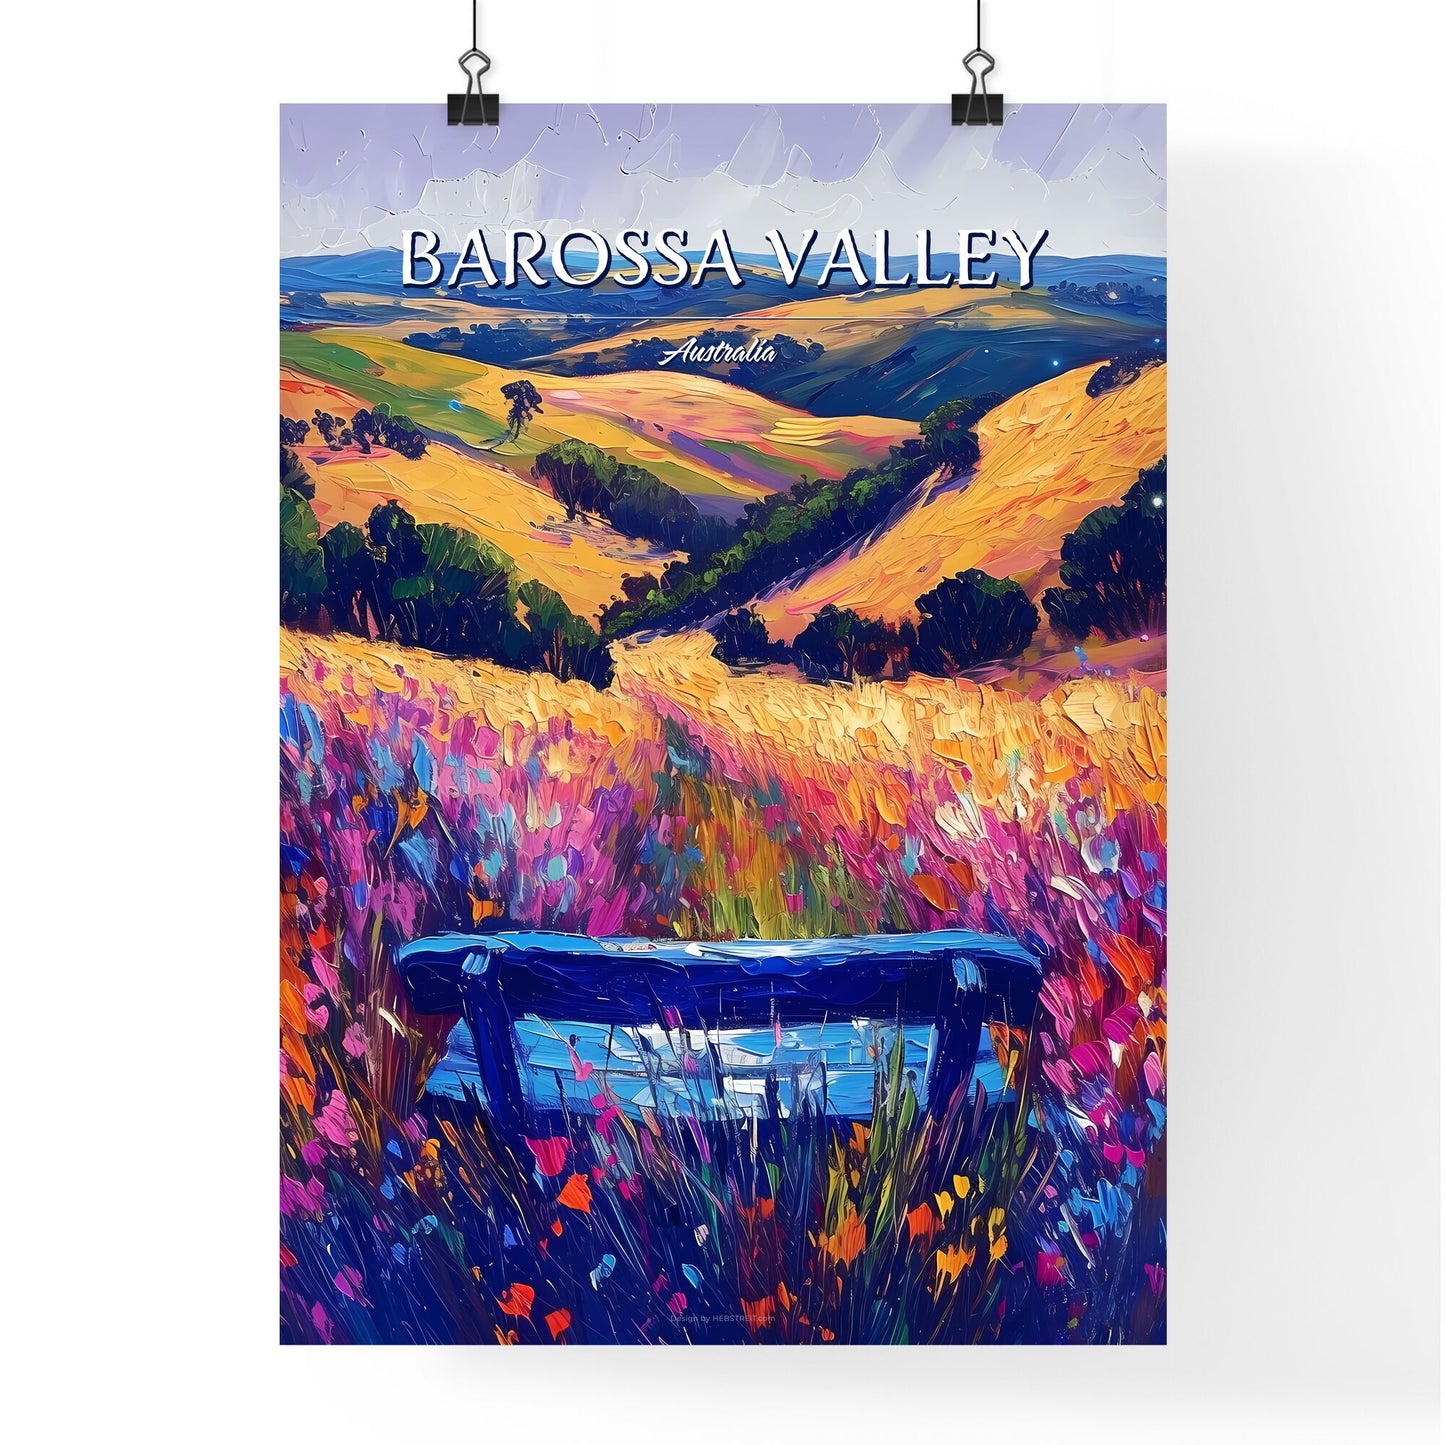 Barossa Valley, Australia - Art print of a painting of a bench in a field of flowers Default Title